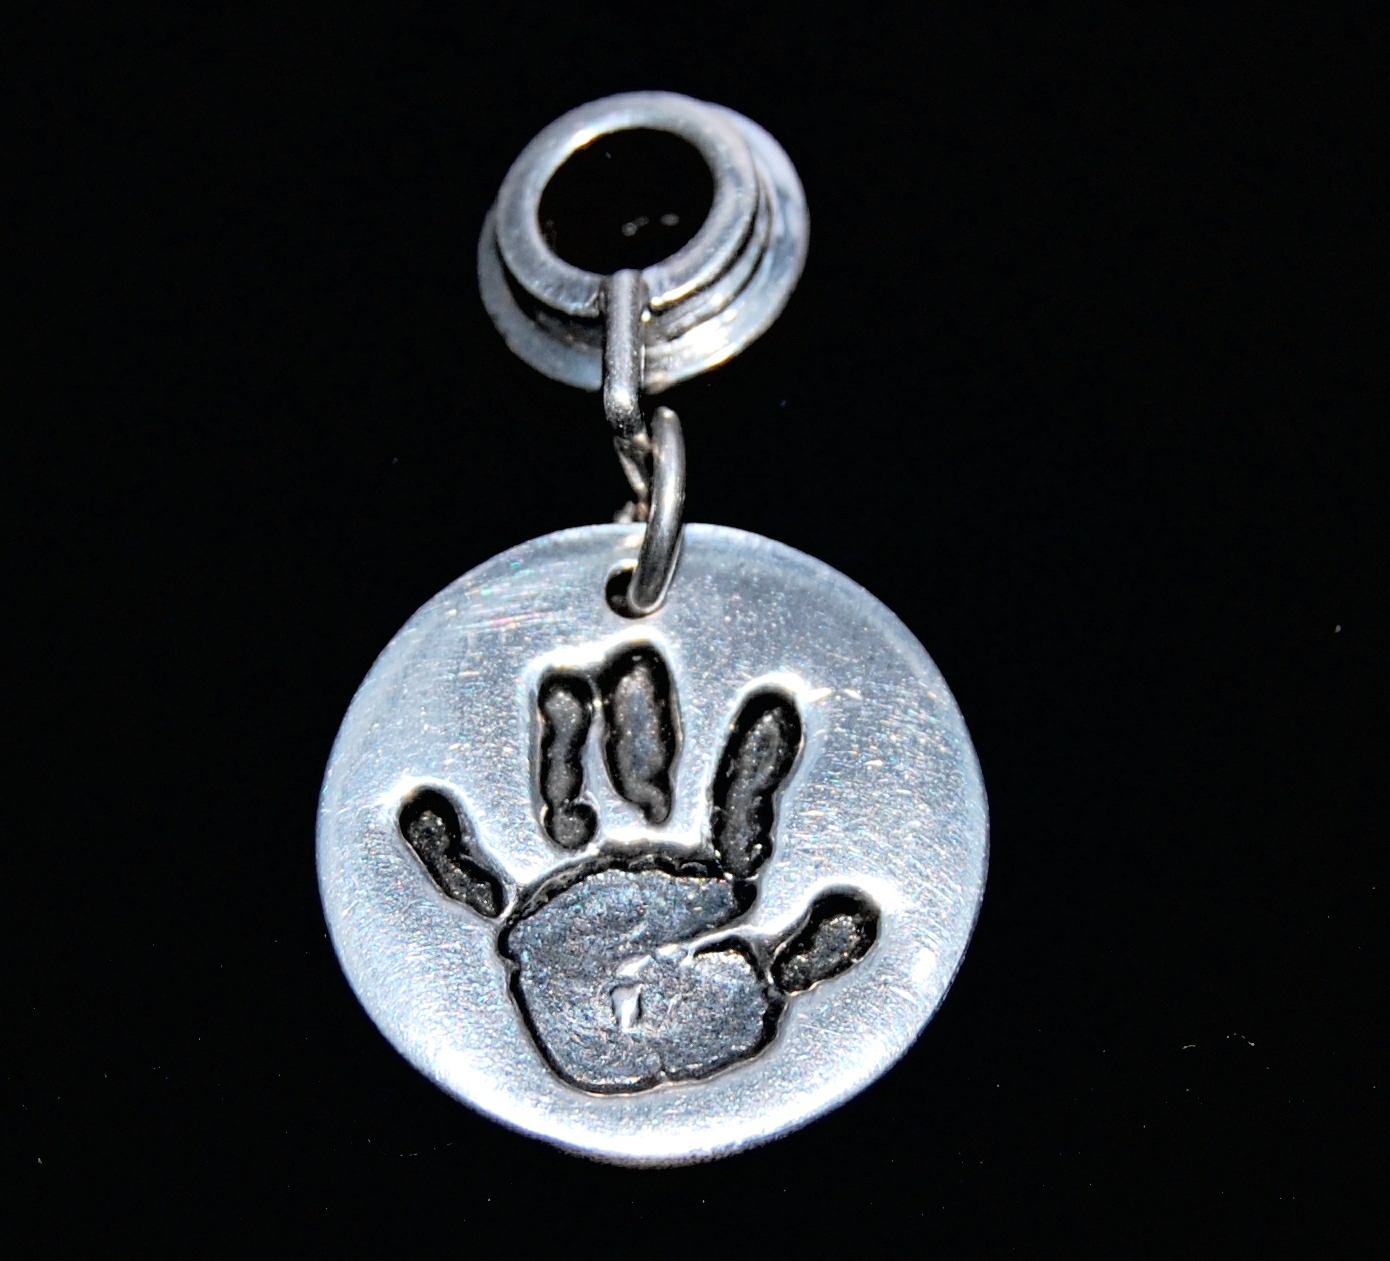 Small silver circle handprint charm presented on a charm carrier. Name is hand inscribed on the back.